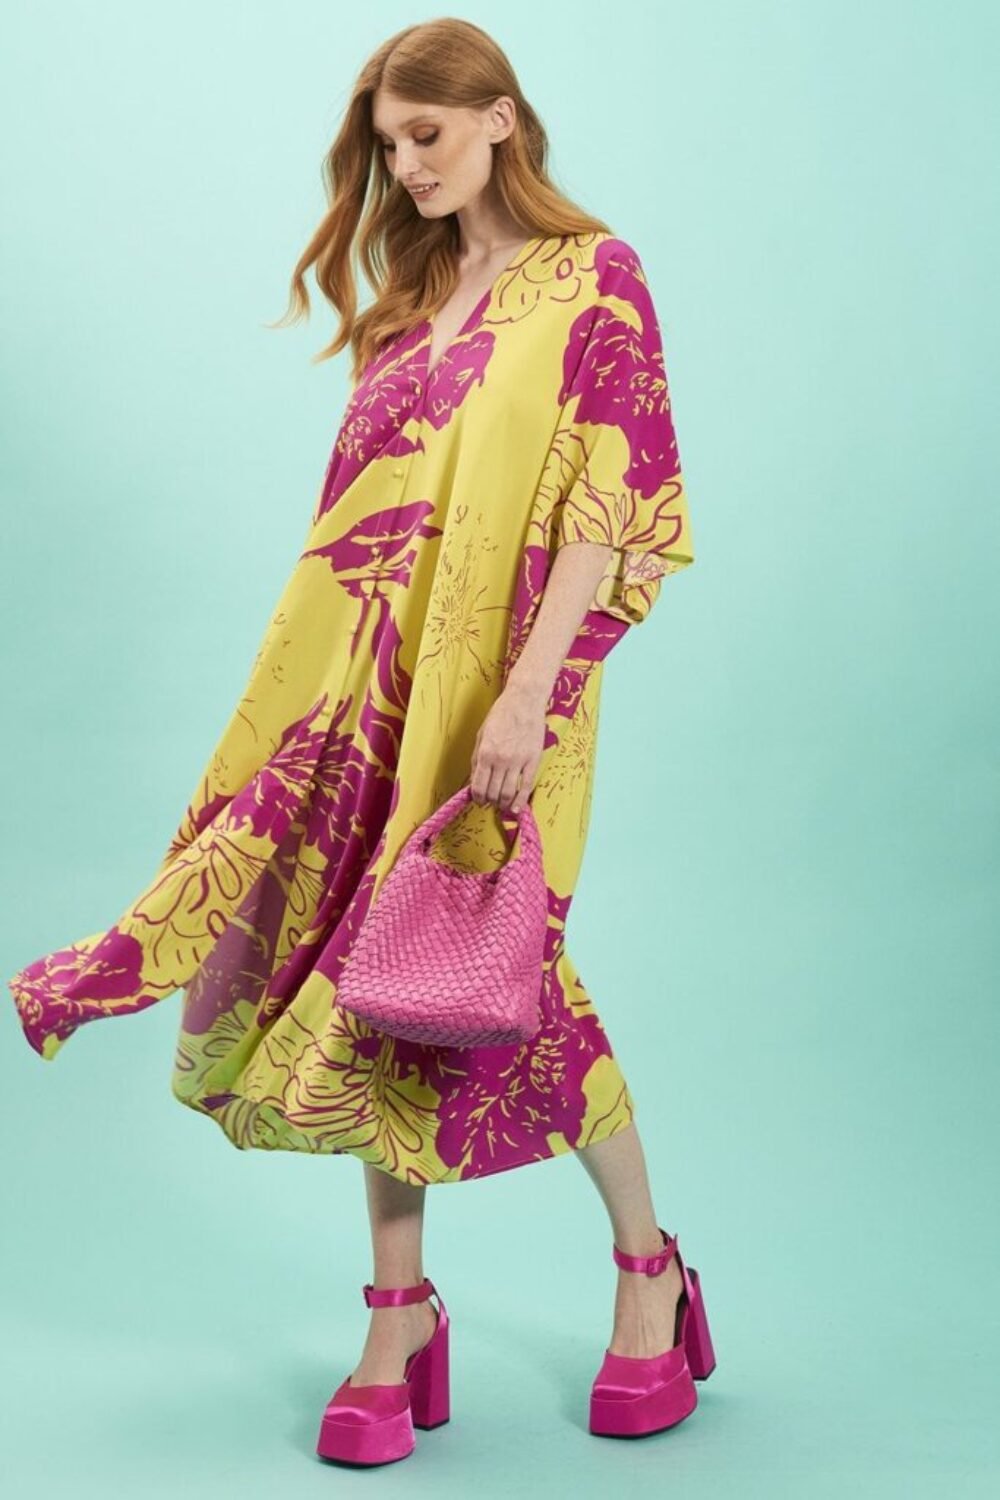 Shop Lux Rayon Blend Sienna Floral Maxi Kimono Dress and women's luxury and designer clothes at www.lux-apparel.co.uk